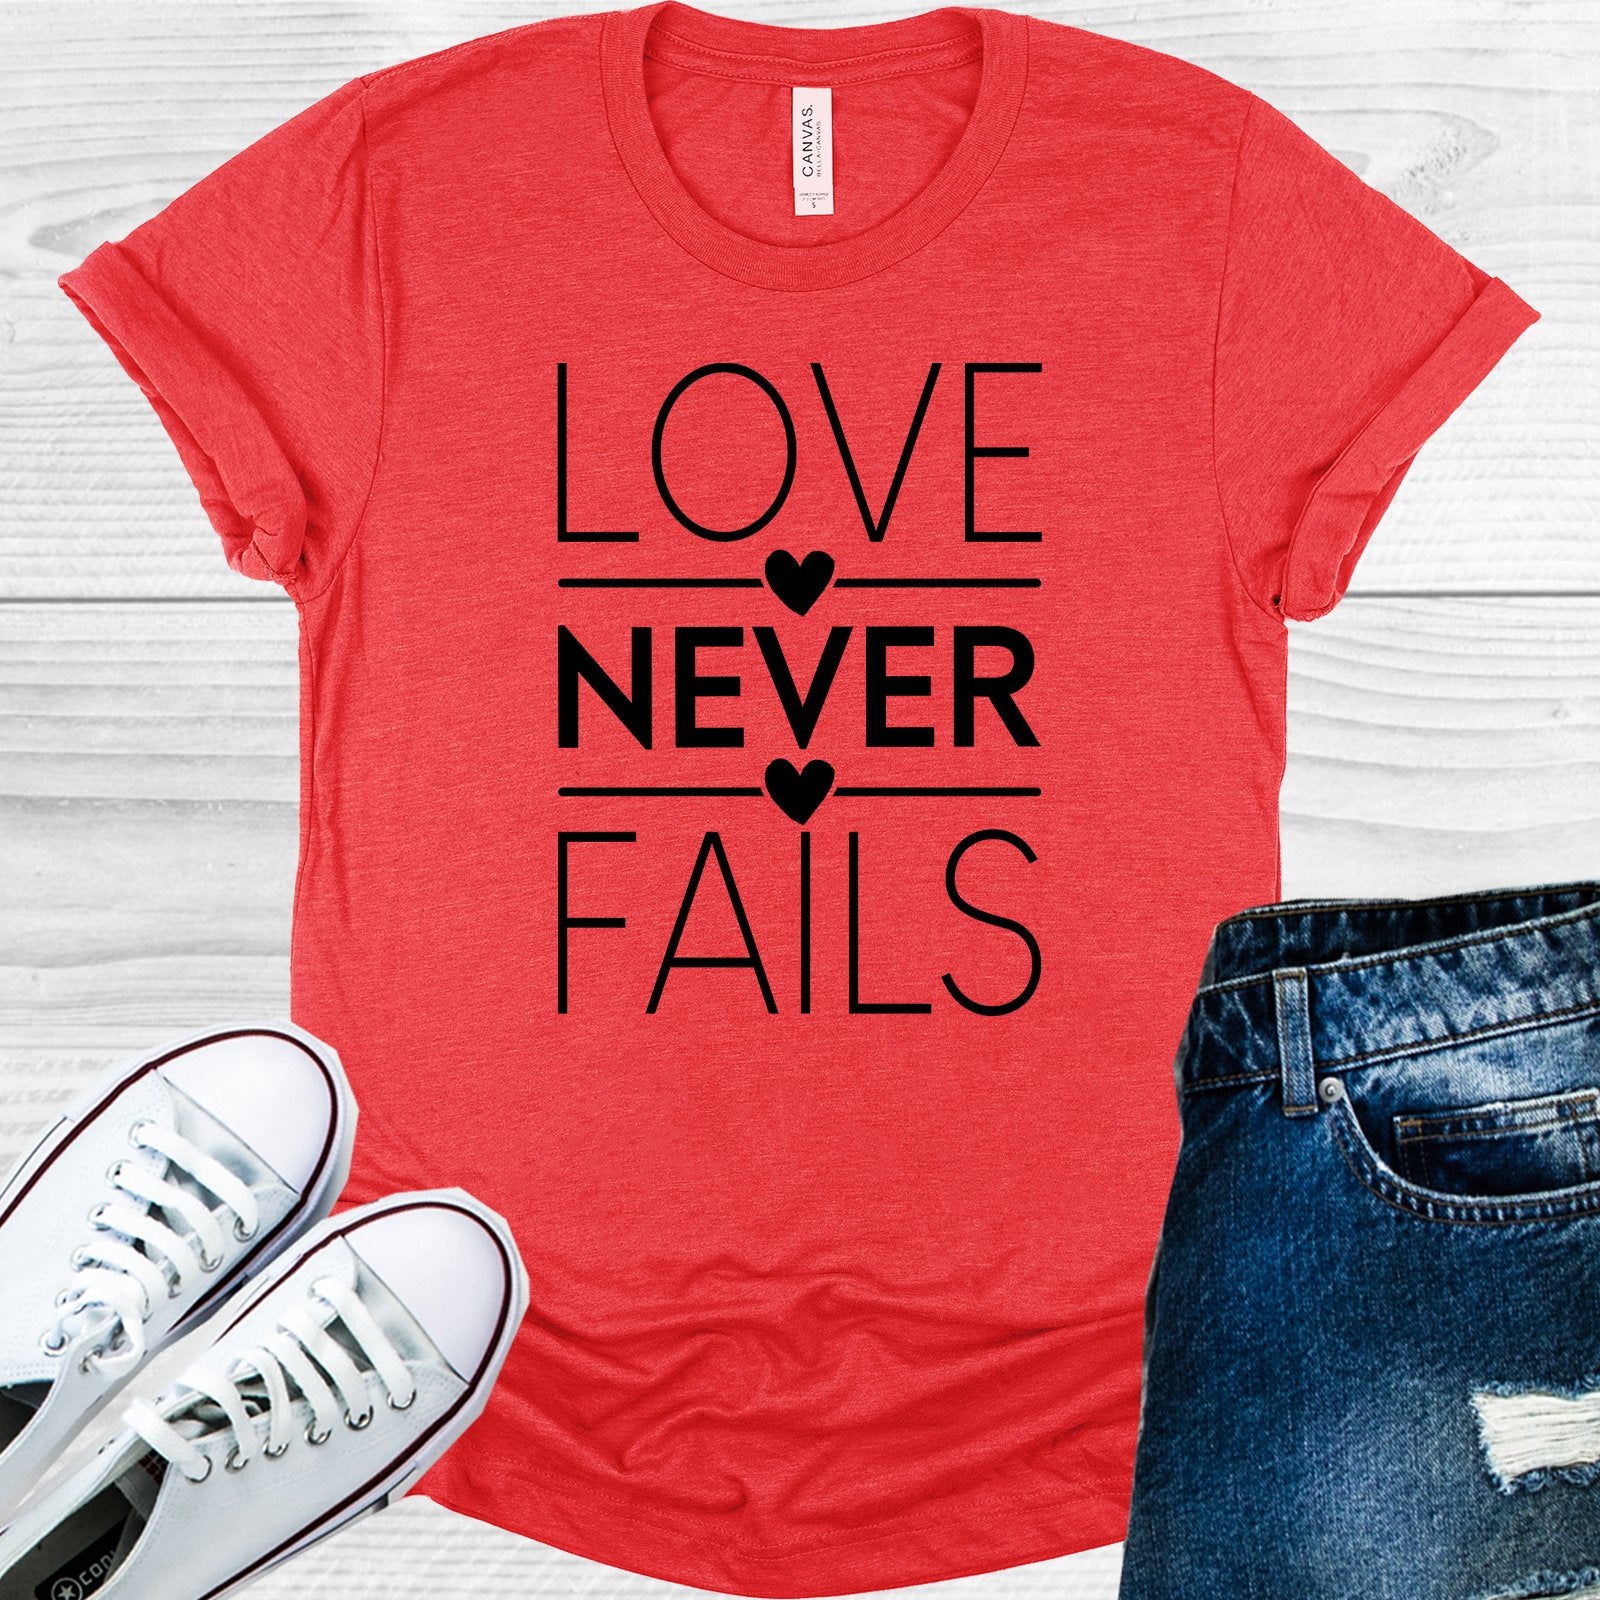 Love Never Fails Graphic Tee Graphic Tee